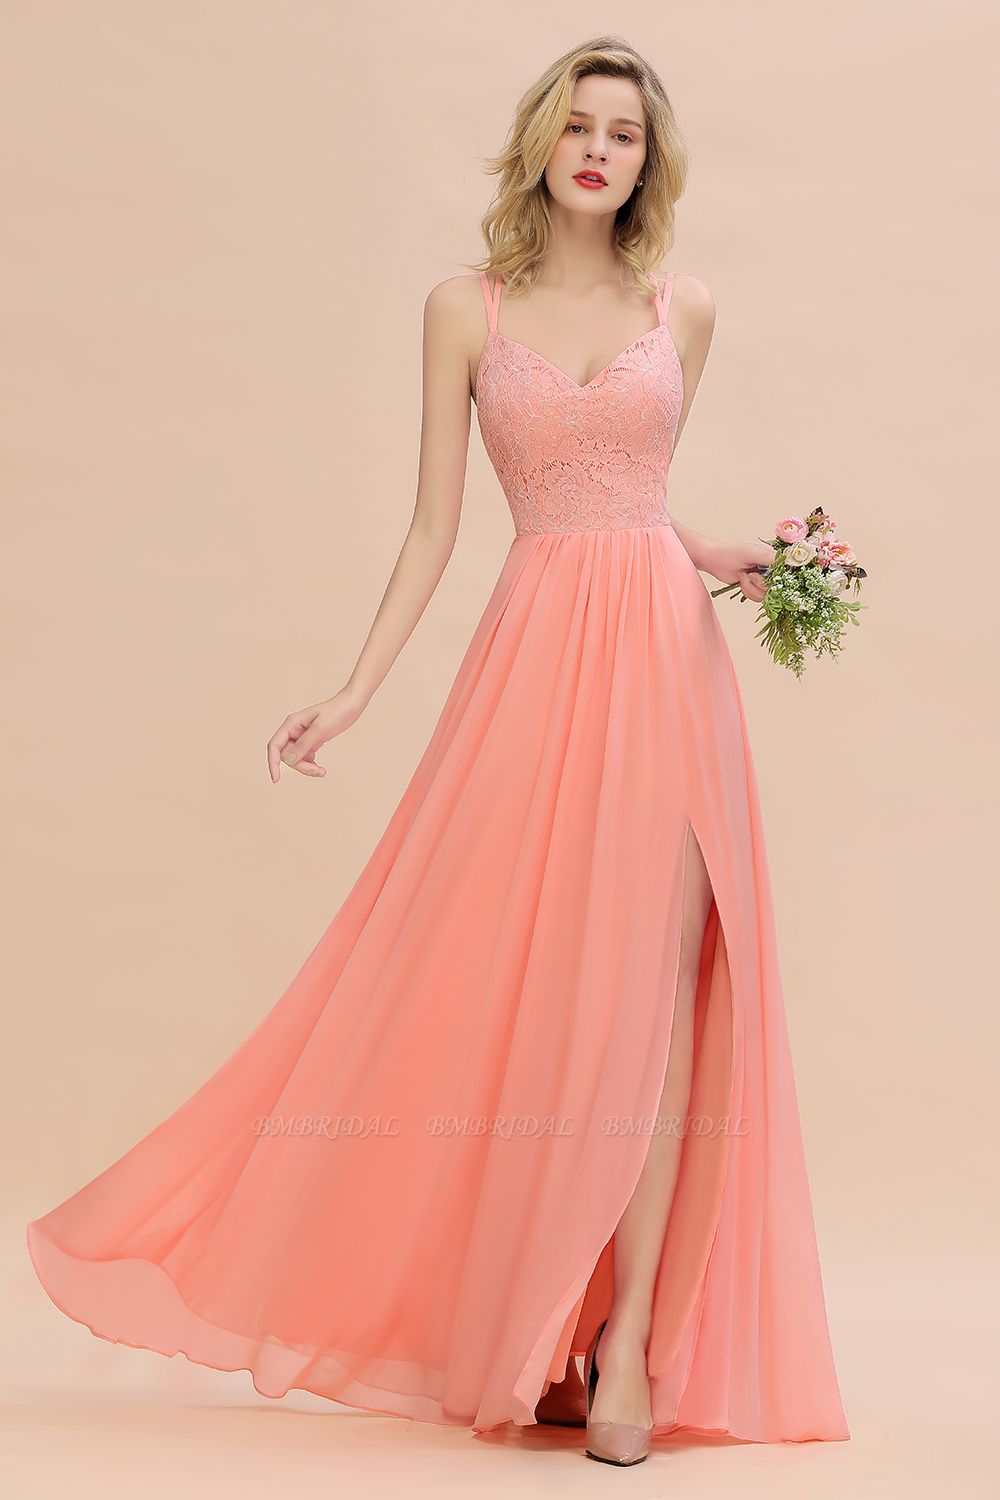 https://www.bmbridal.com/sexy-spaghetti-straps-slit-lace-coral-bridesmaid-dress-g395?cate_2=38